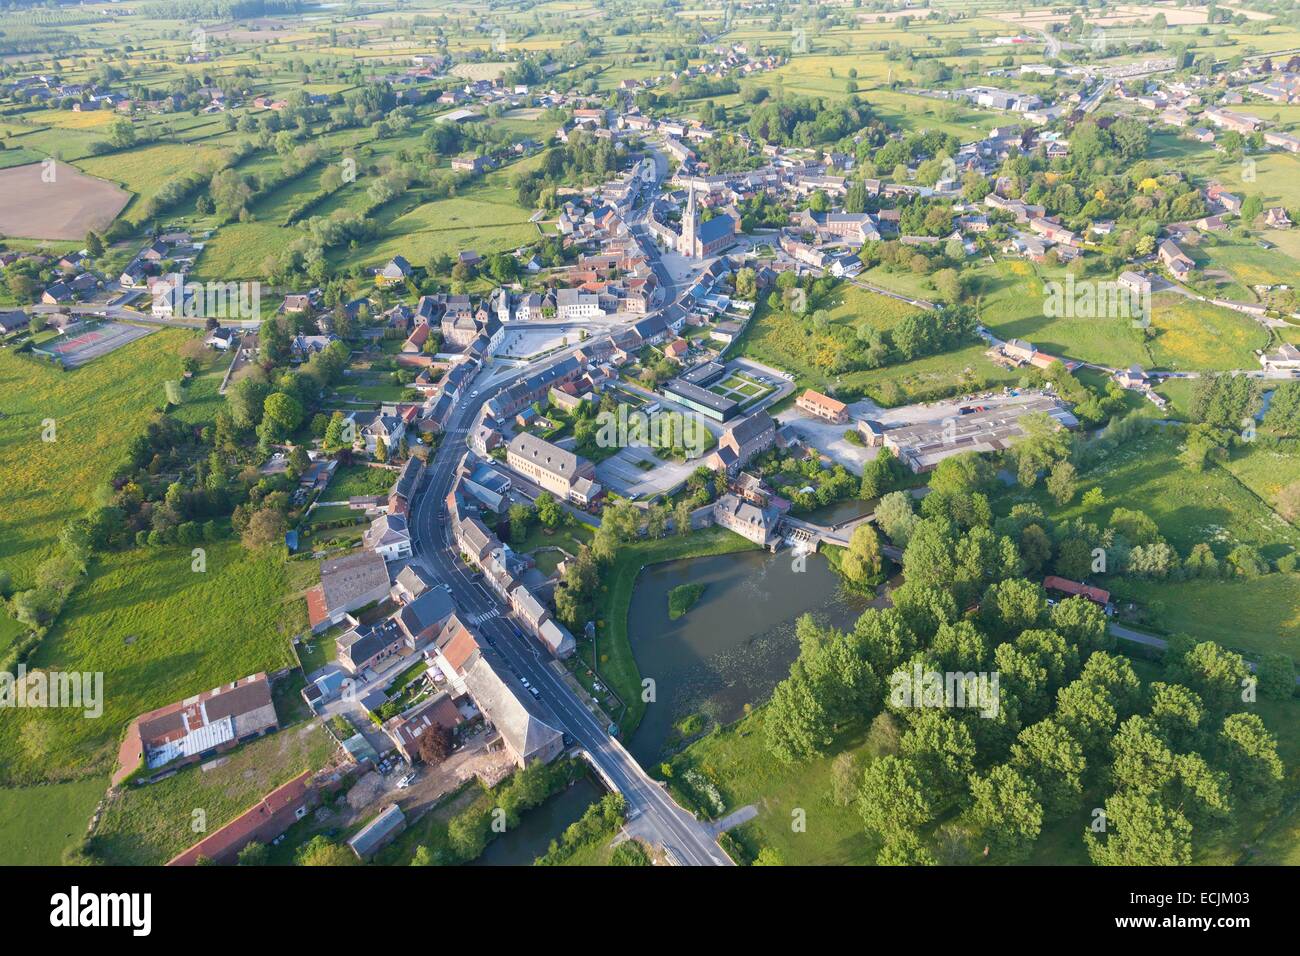 France, Nord, Maroilles (aerial view) Stock Photo